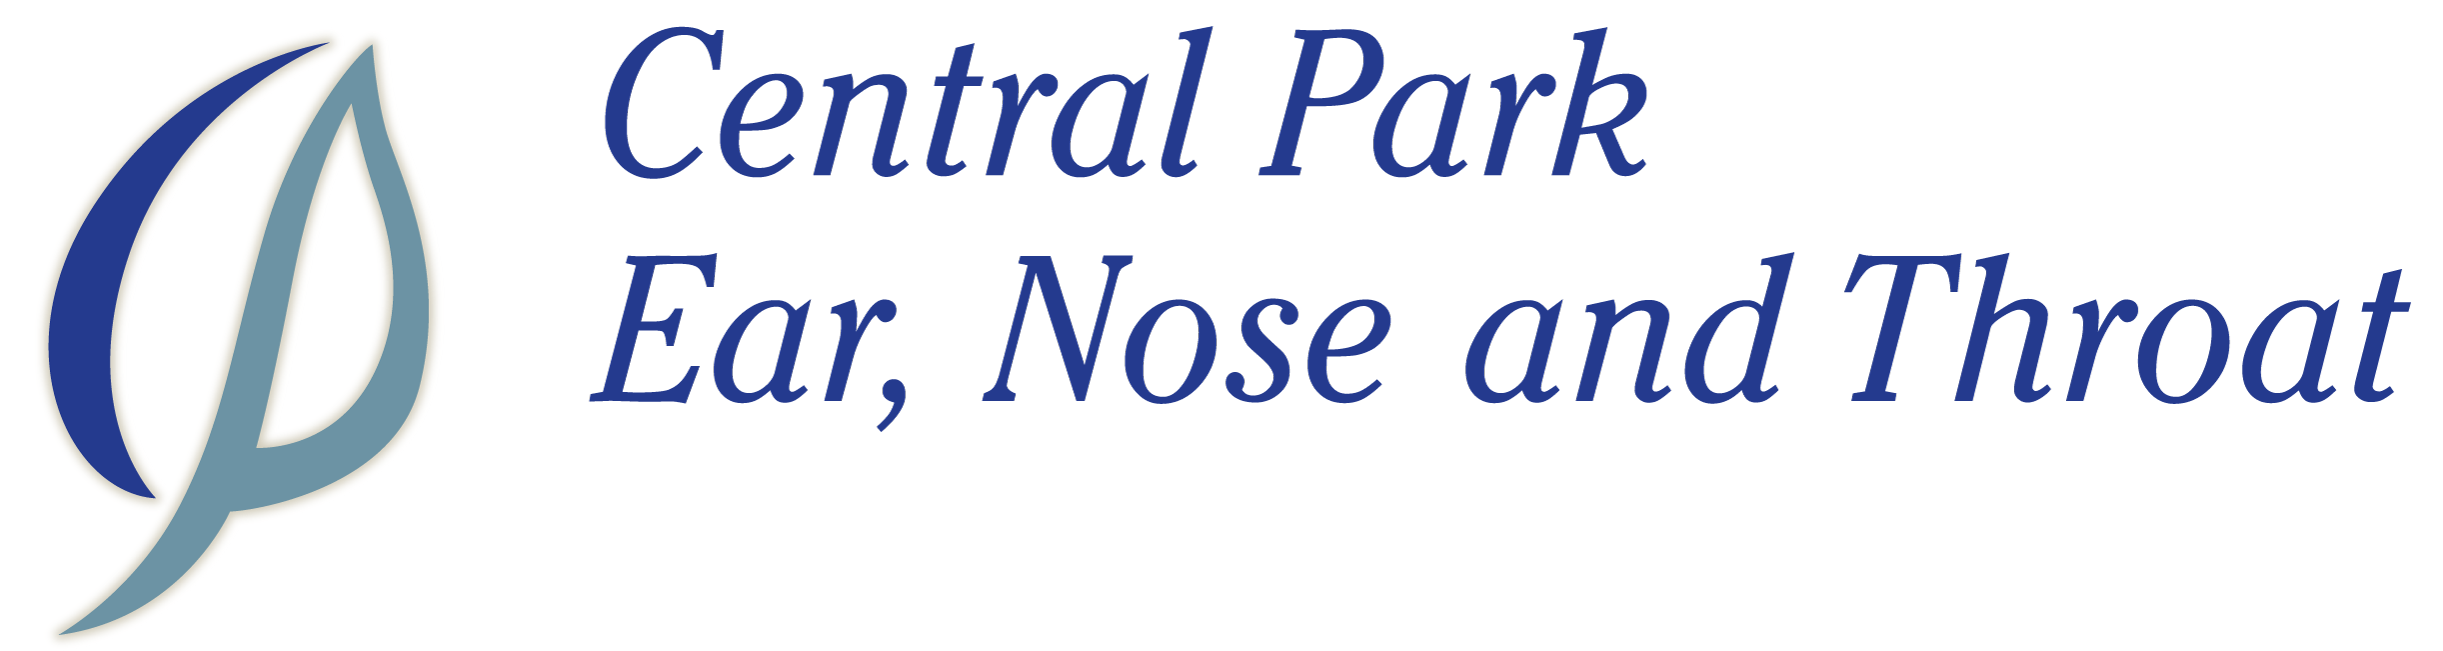 Central Park Ear, Nose and Throat Logo